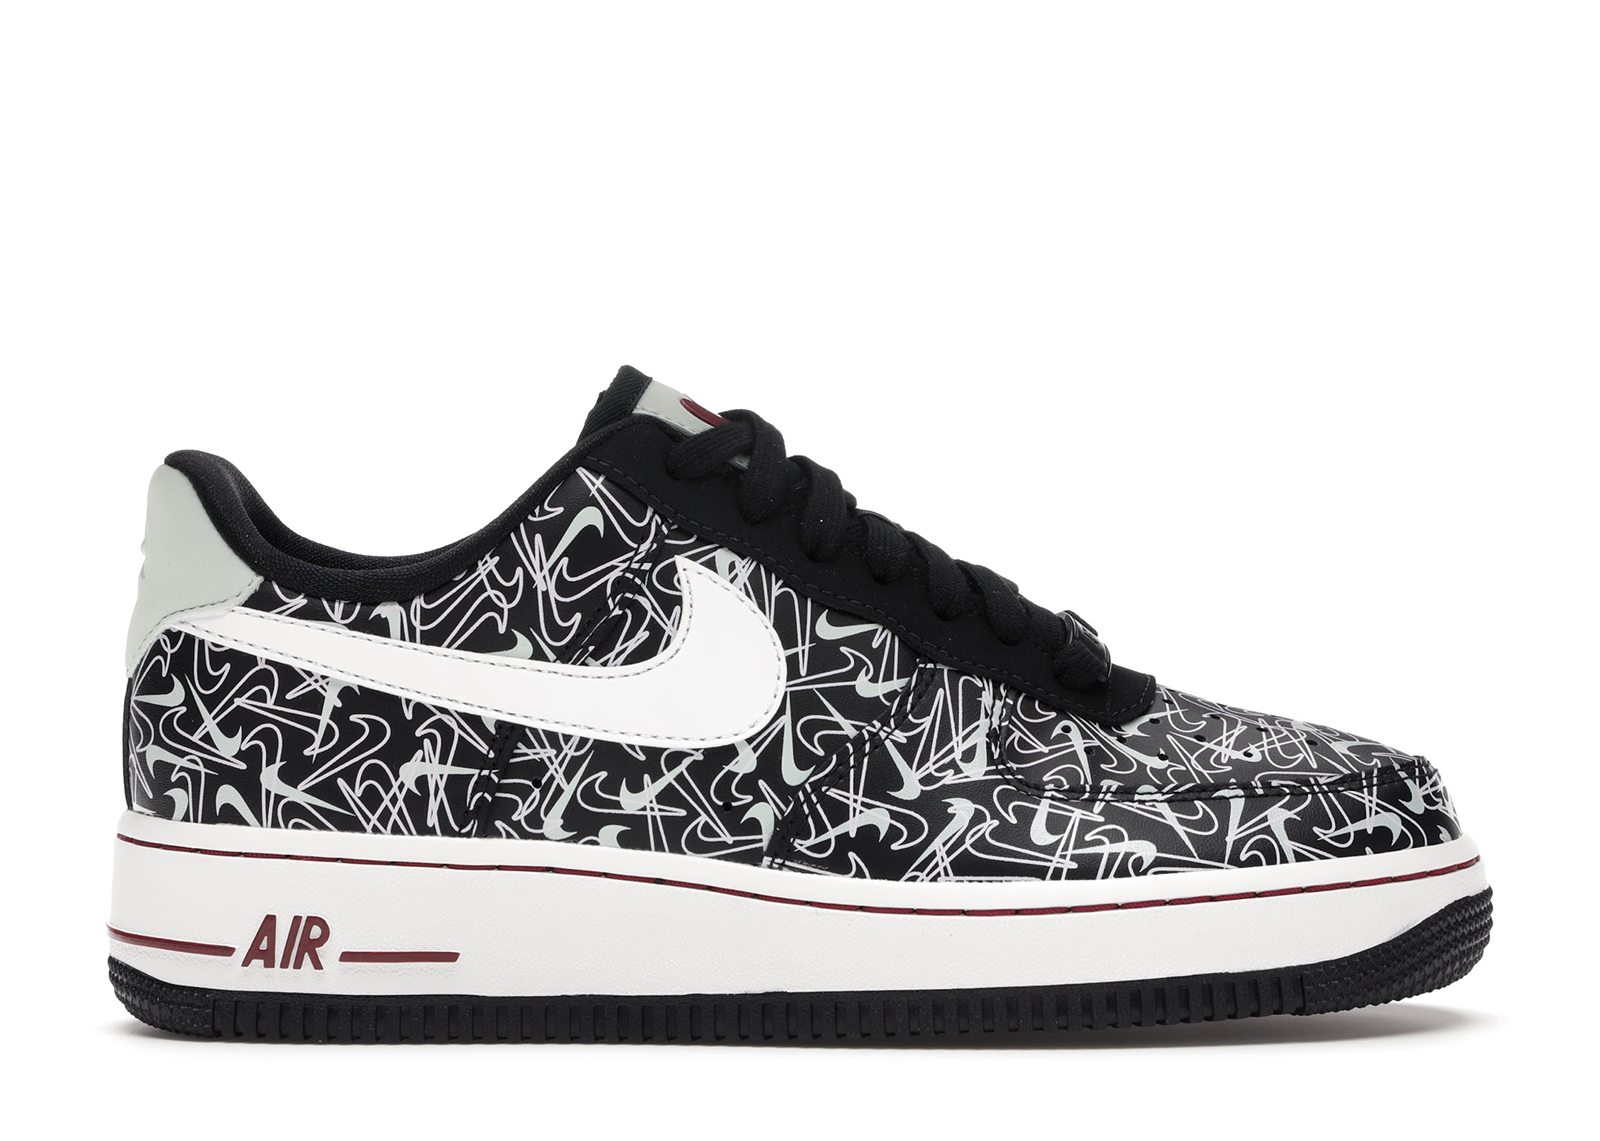 Nike Air Force 1 Low Valentine's Day (2020) (Women's) - BV0319-002